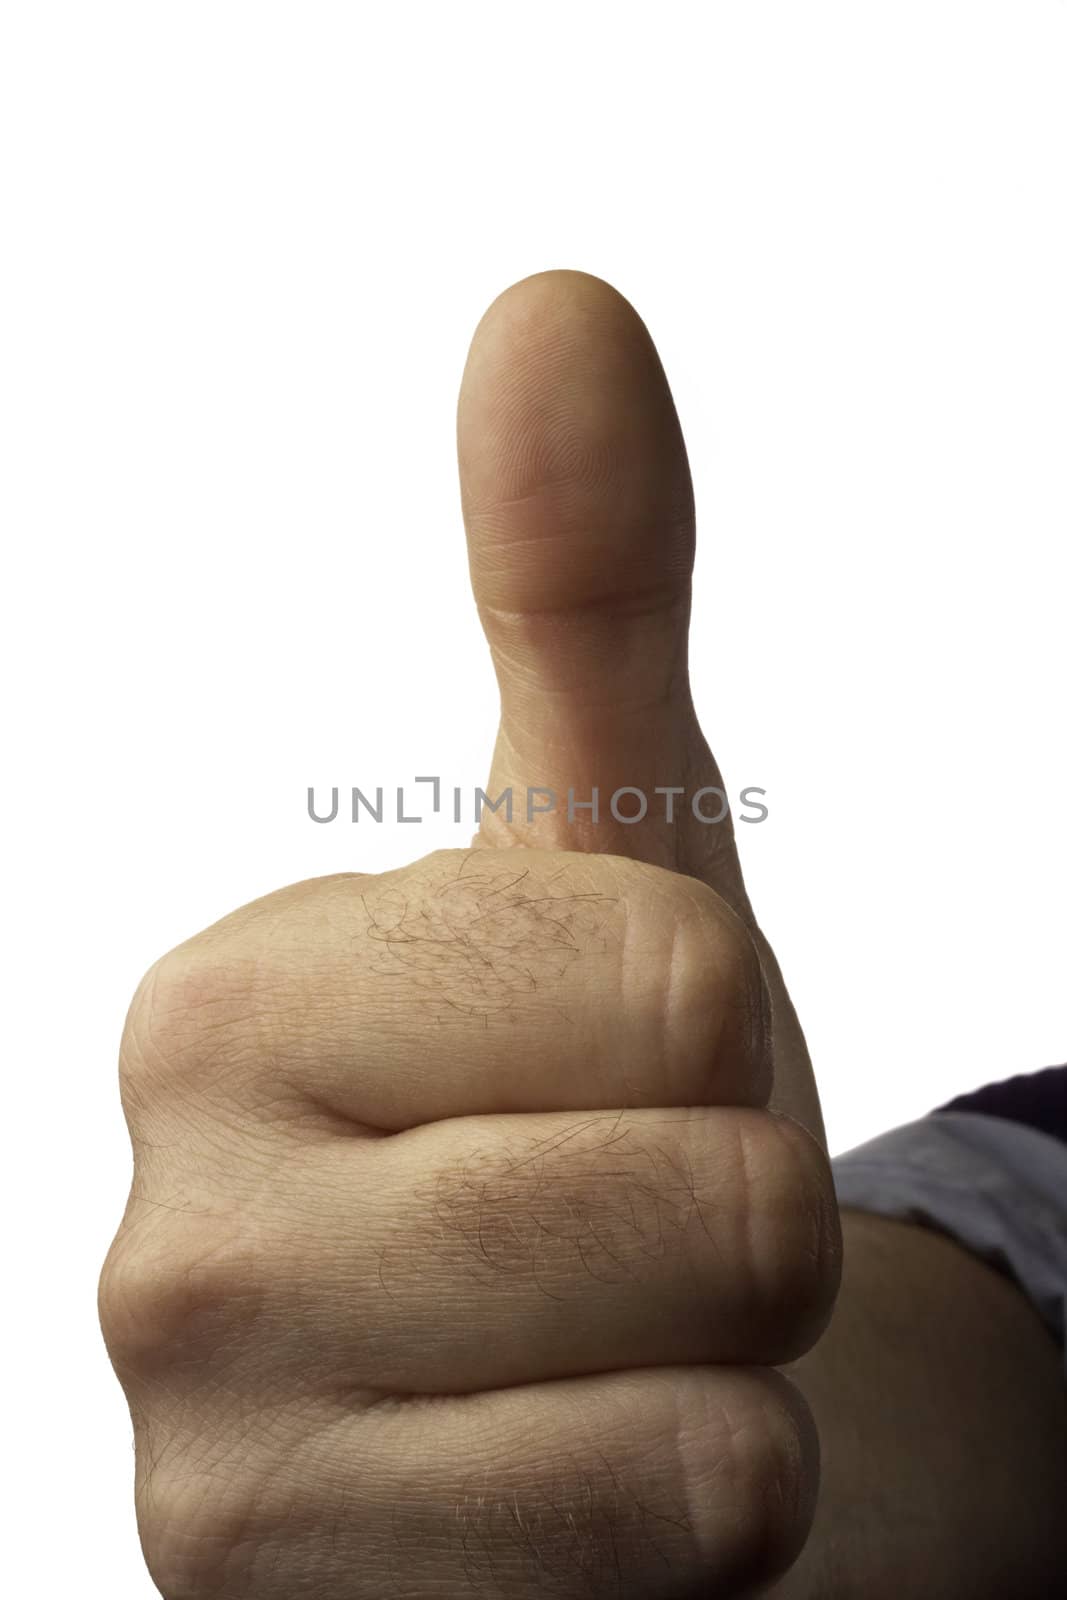 Male hand with thumb up by agiampiccolo